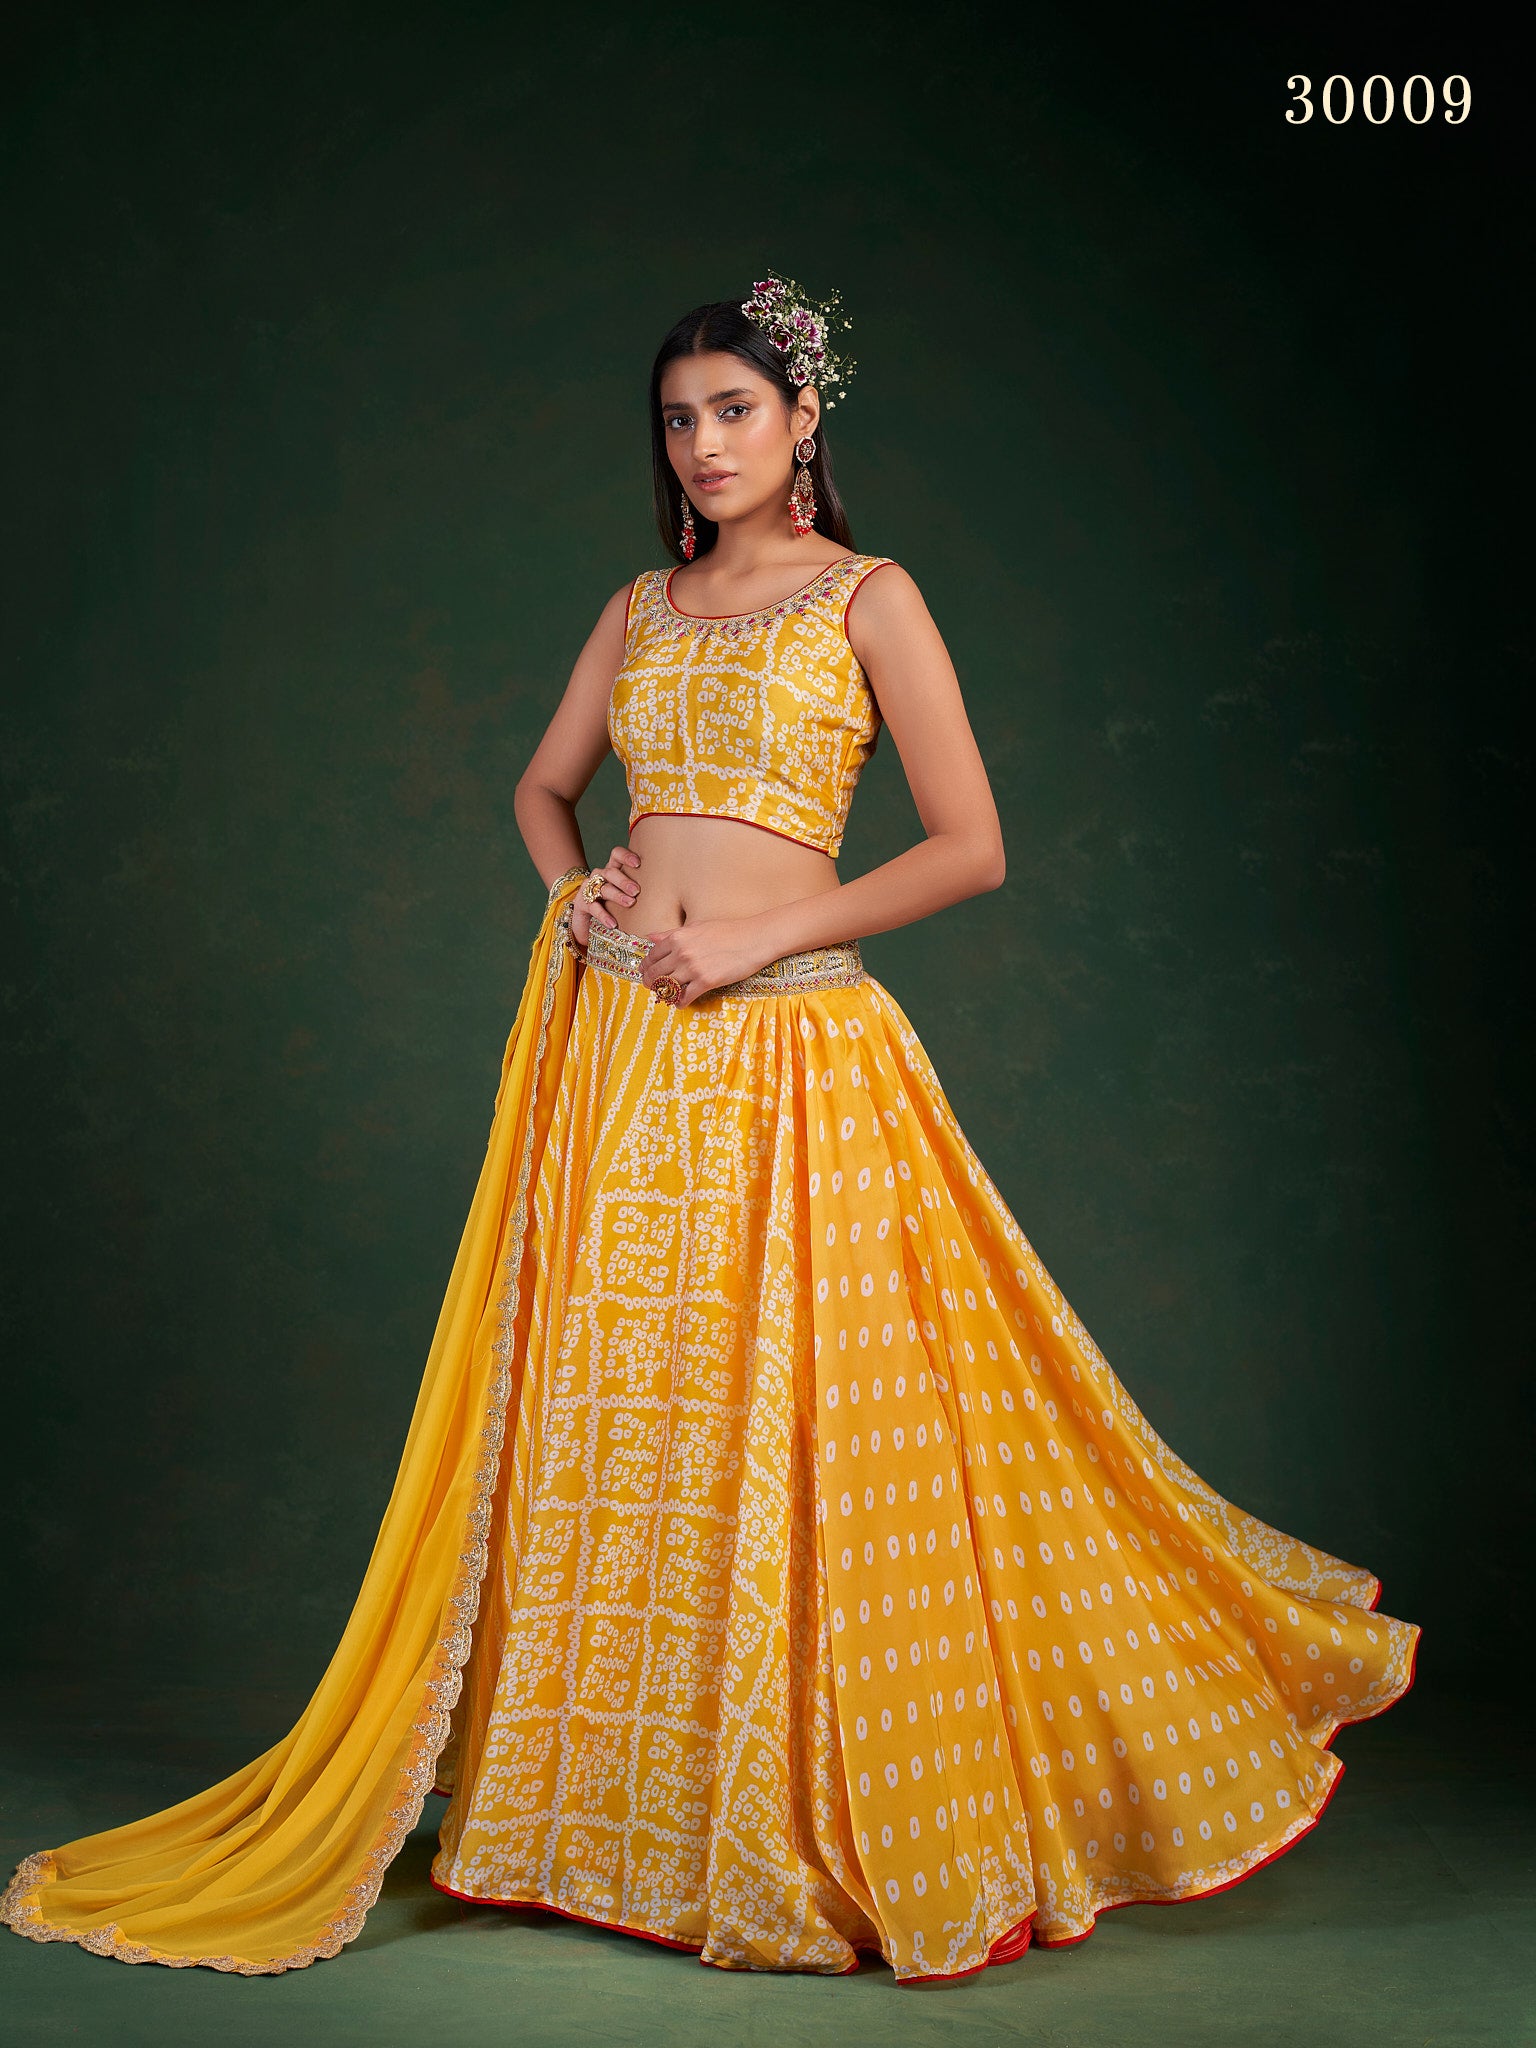 Beautiful Woman With An Orange And Gold Lehenga Sitting On The Floor  Background, Lehenga Picture, Dress, Indian Background Image And Wallpaper  for Free Download